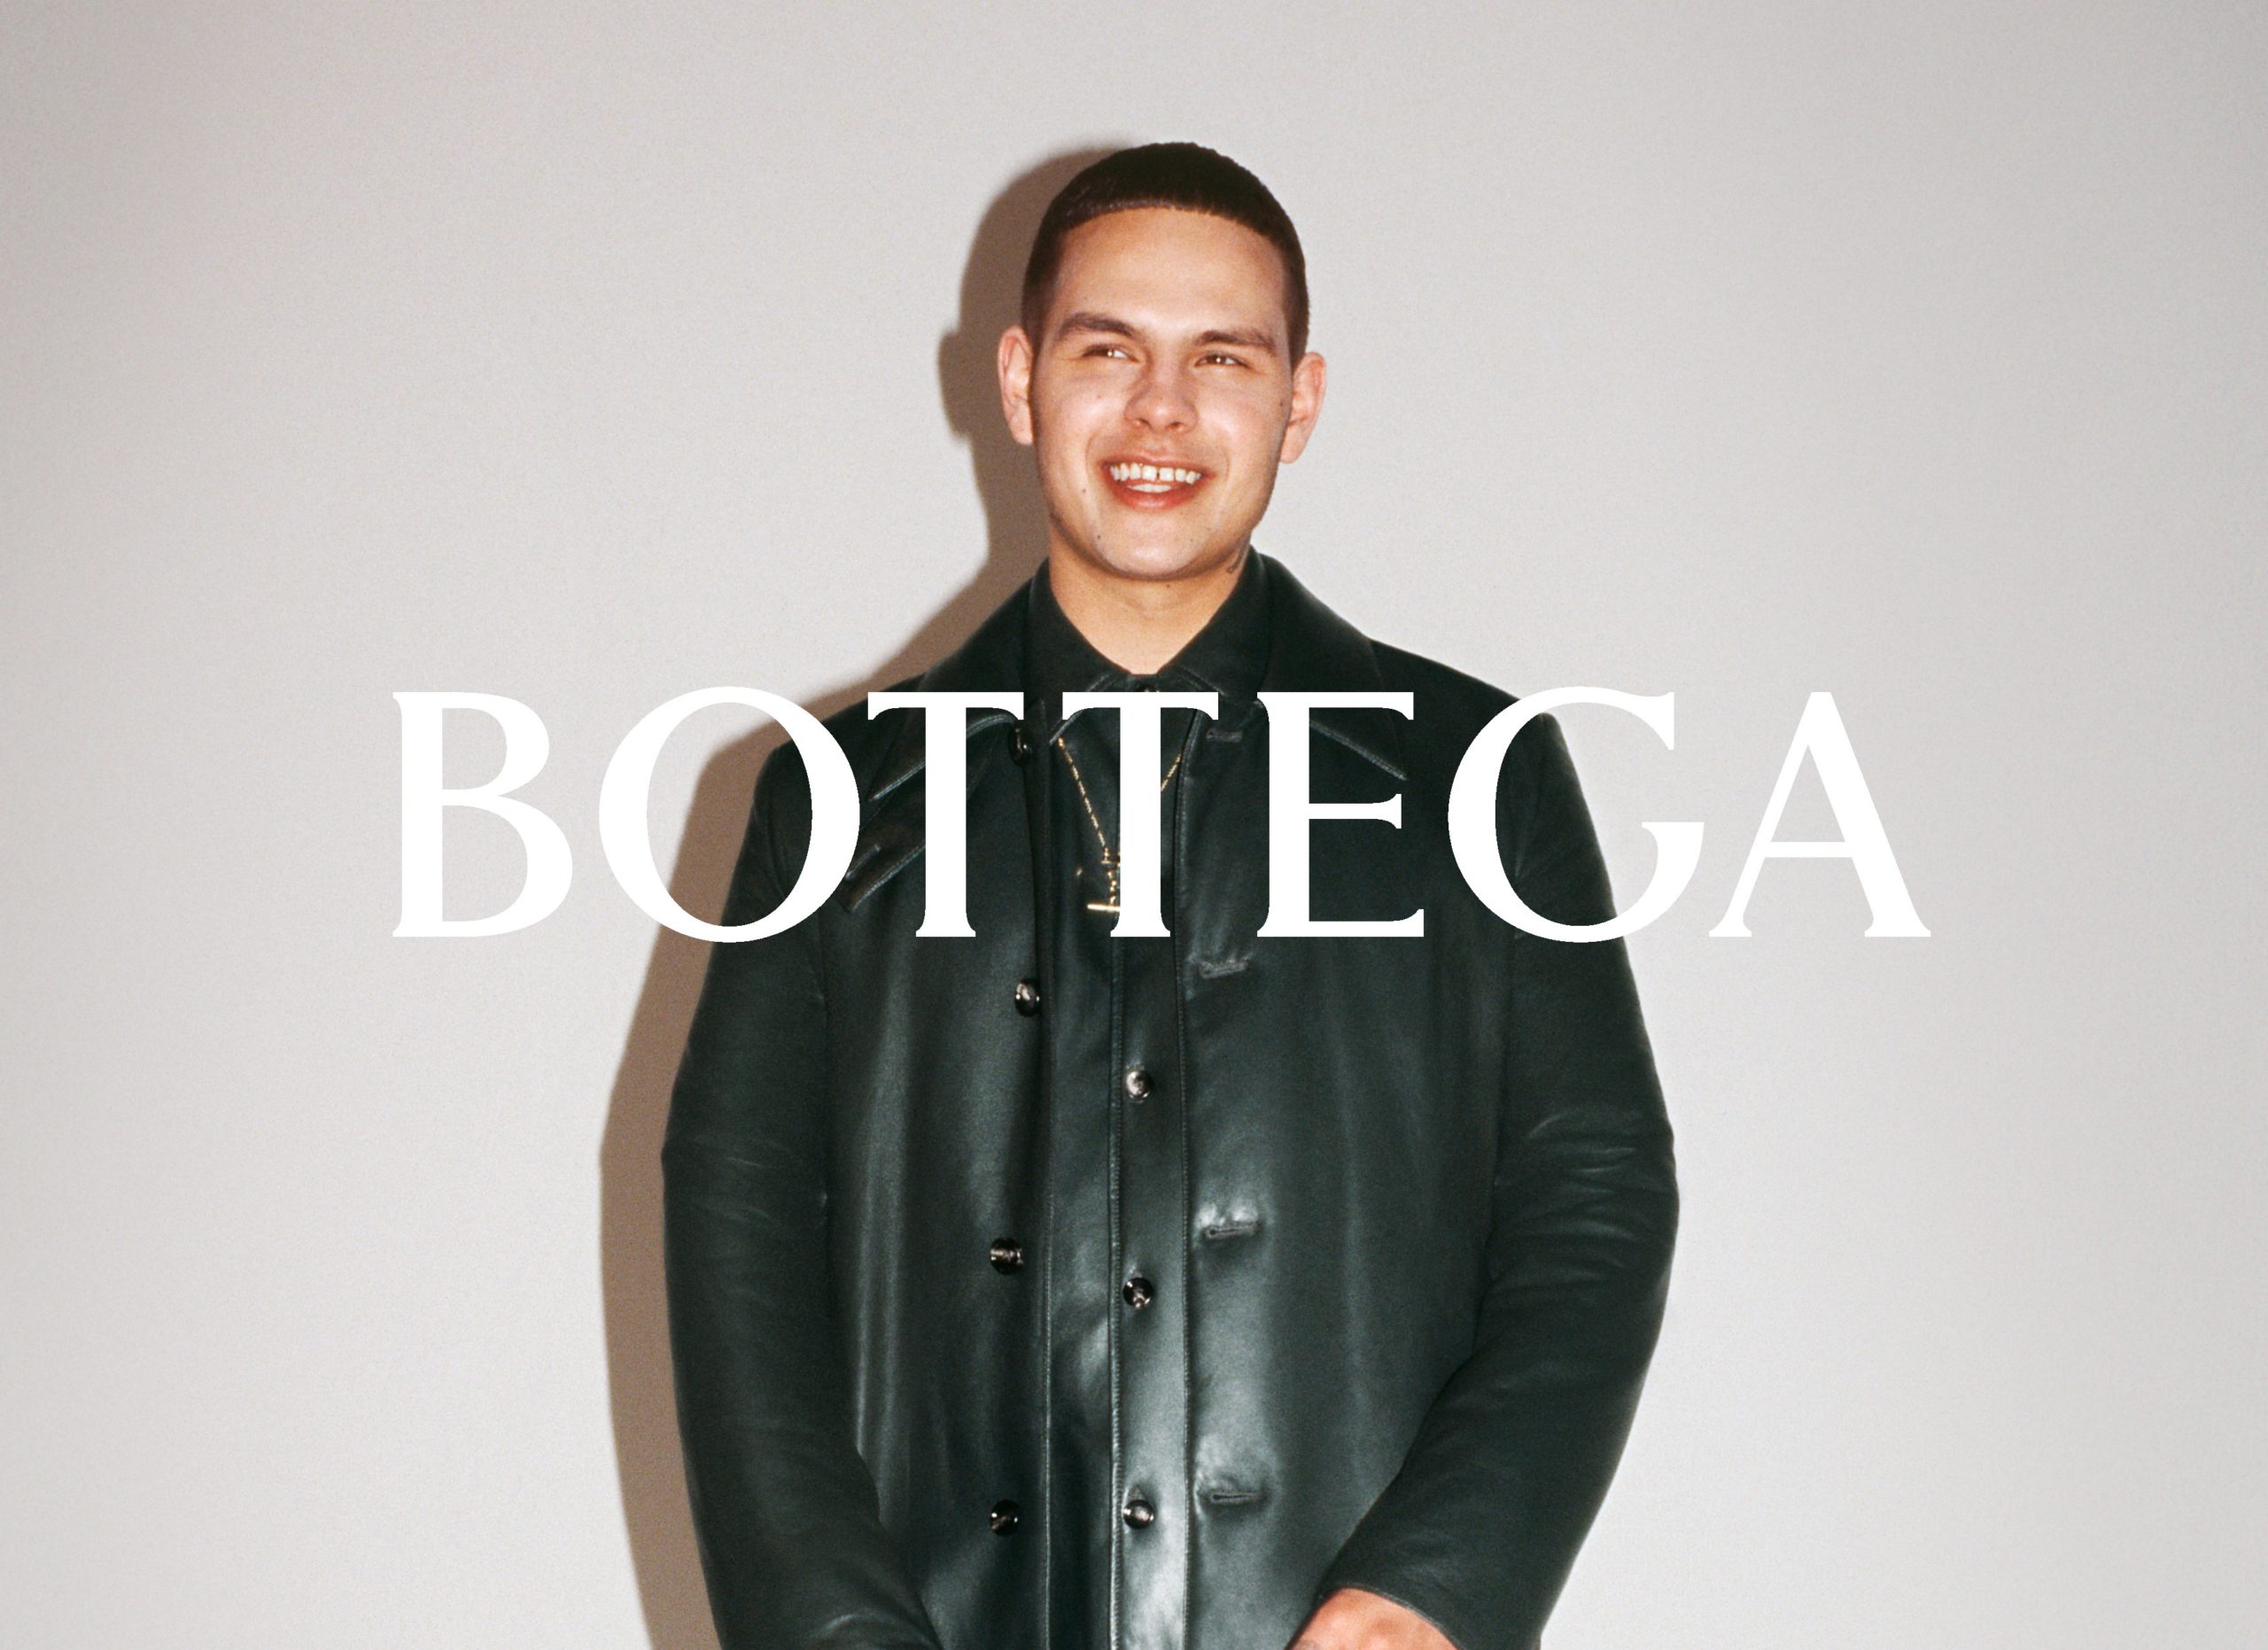 Bottega Veneta enlists a roster of Celebrities to model its Latest Collection